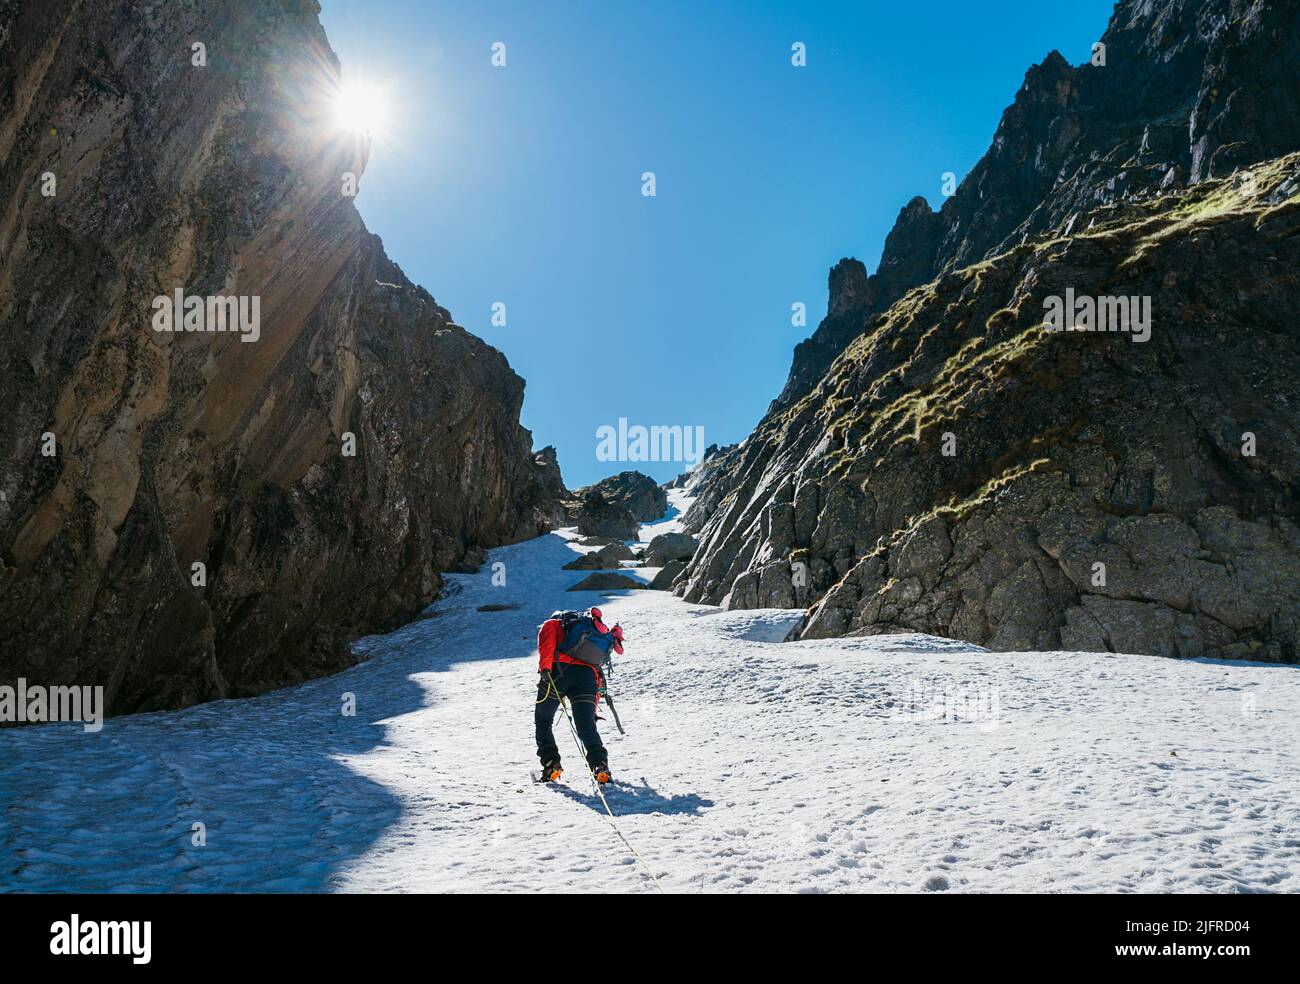 Team roping up woman with climbing axe dressed high altitude mountaineering clothes with backpack walking by snowy slope in the couloir with backlight Stock Photo